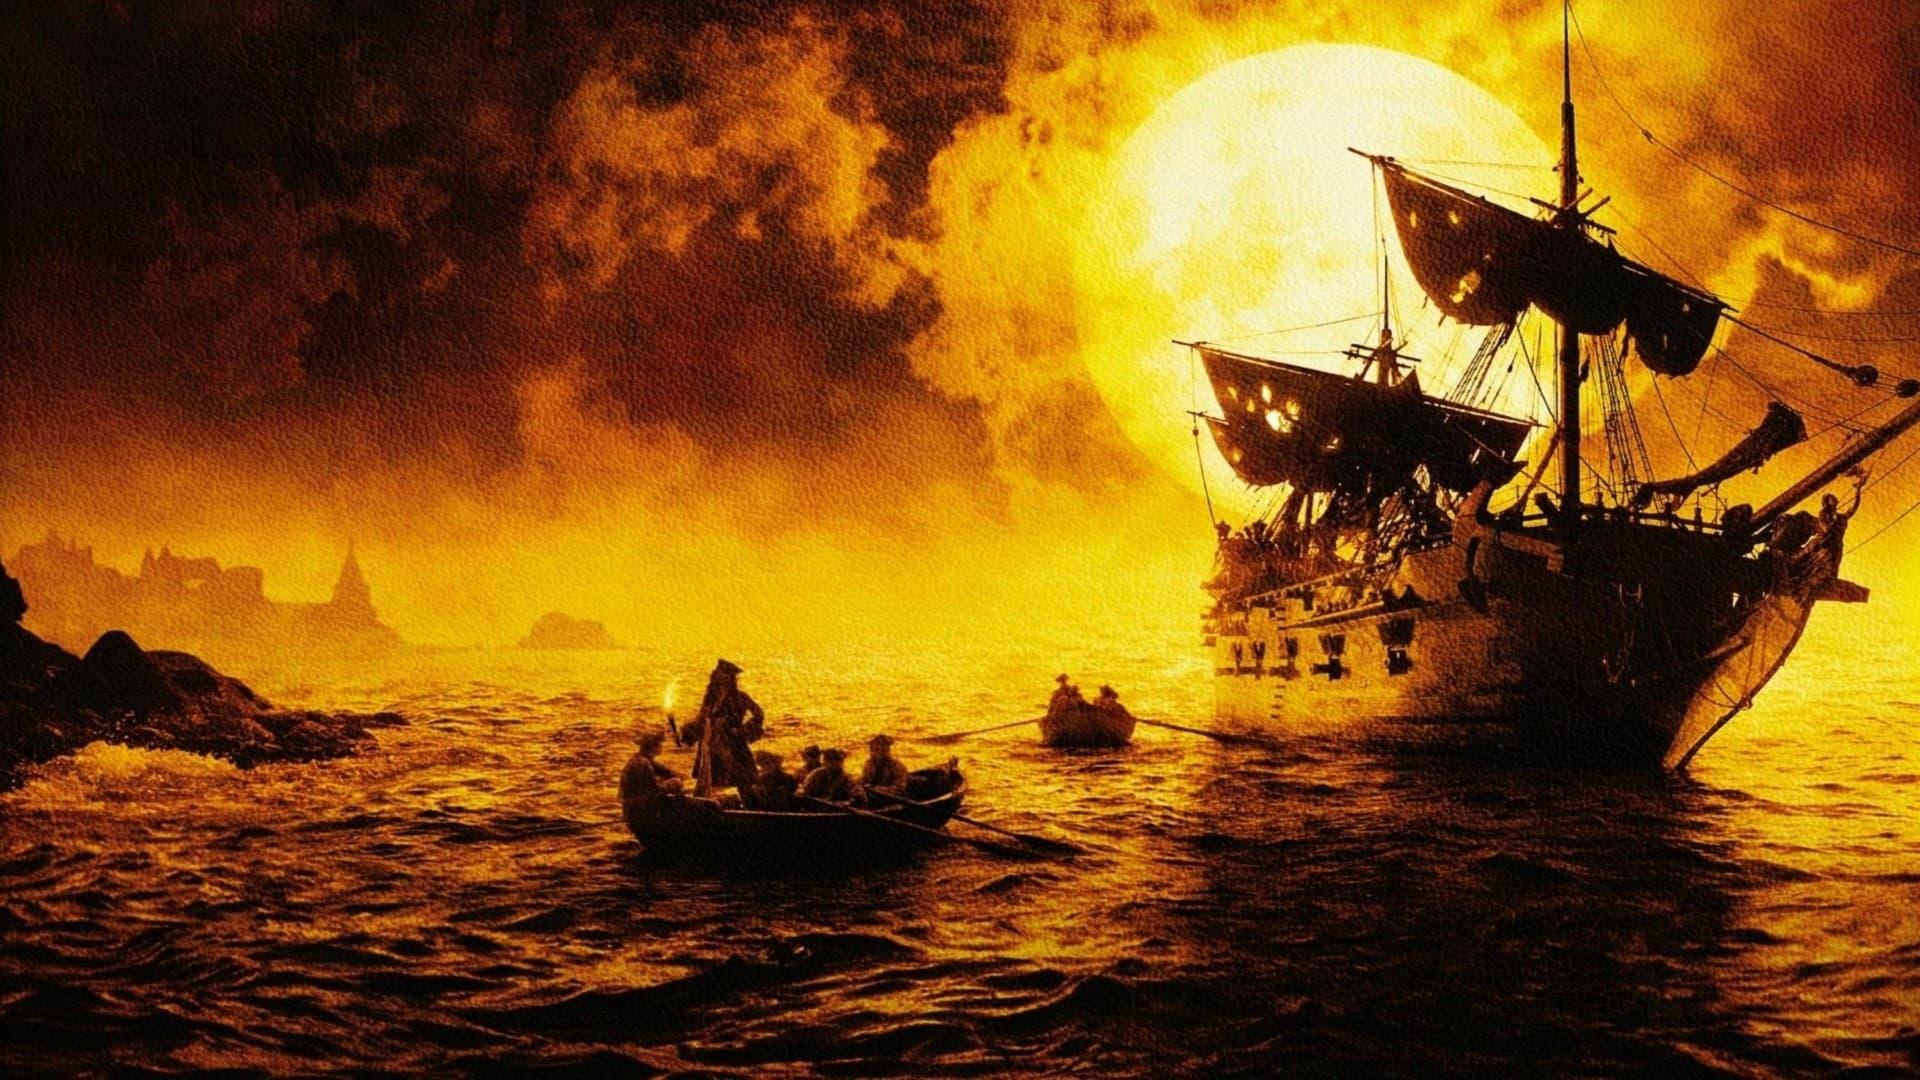 An Epic at Sea: The Making of 'Pirates of the Caribbean: The Curse of the Black Pearl' backdrop